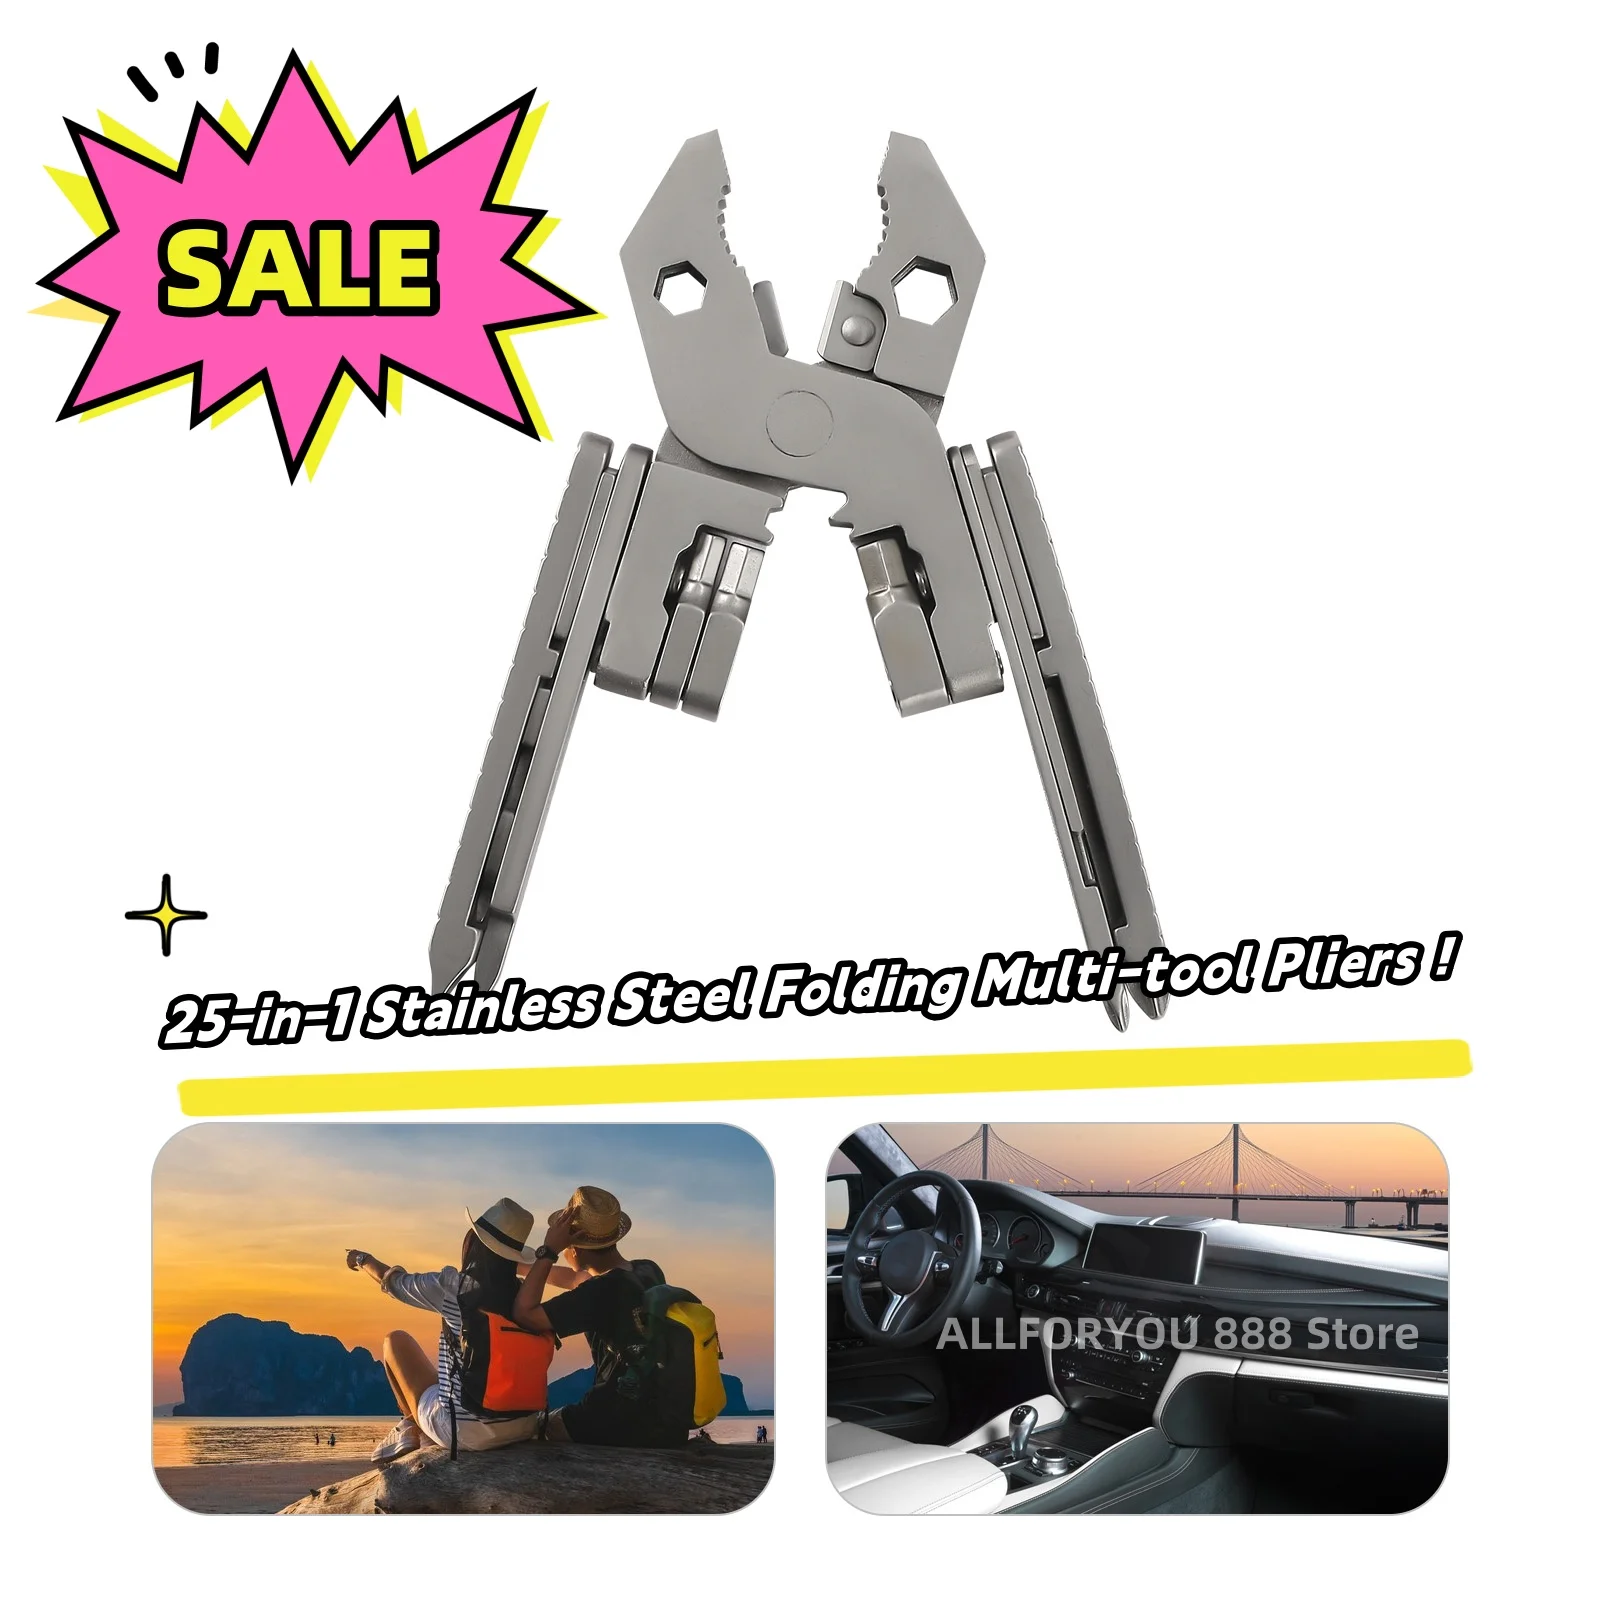 25-in-1 Multi Tool Pliers Stainless Steel Portable Outdoor Compact Folding - $53.17